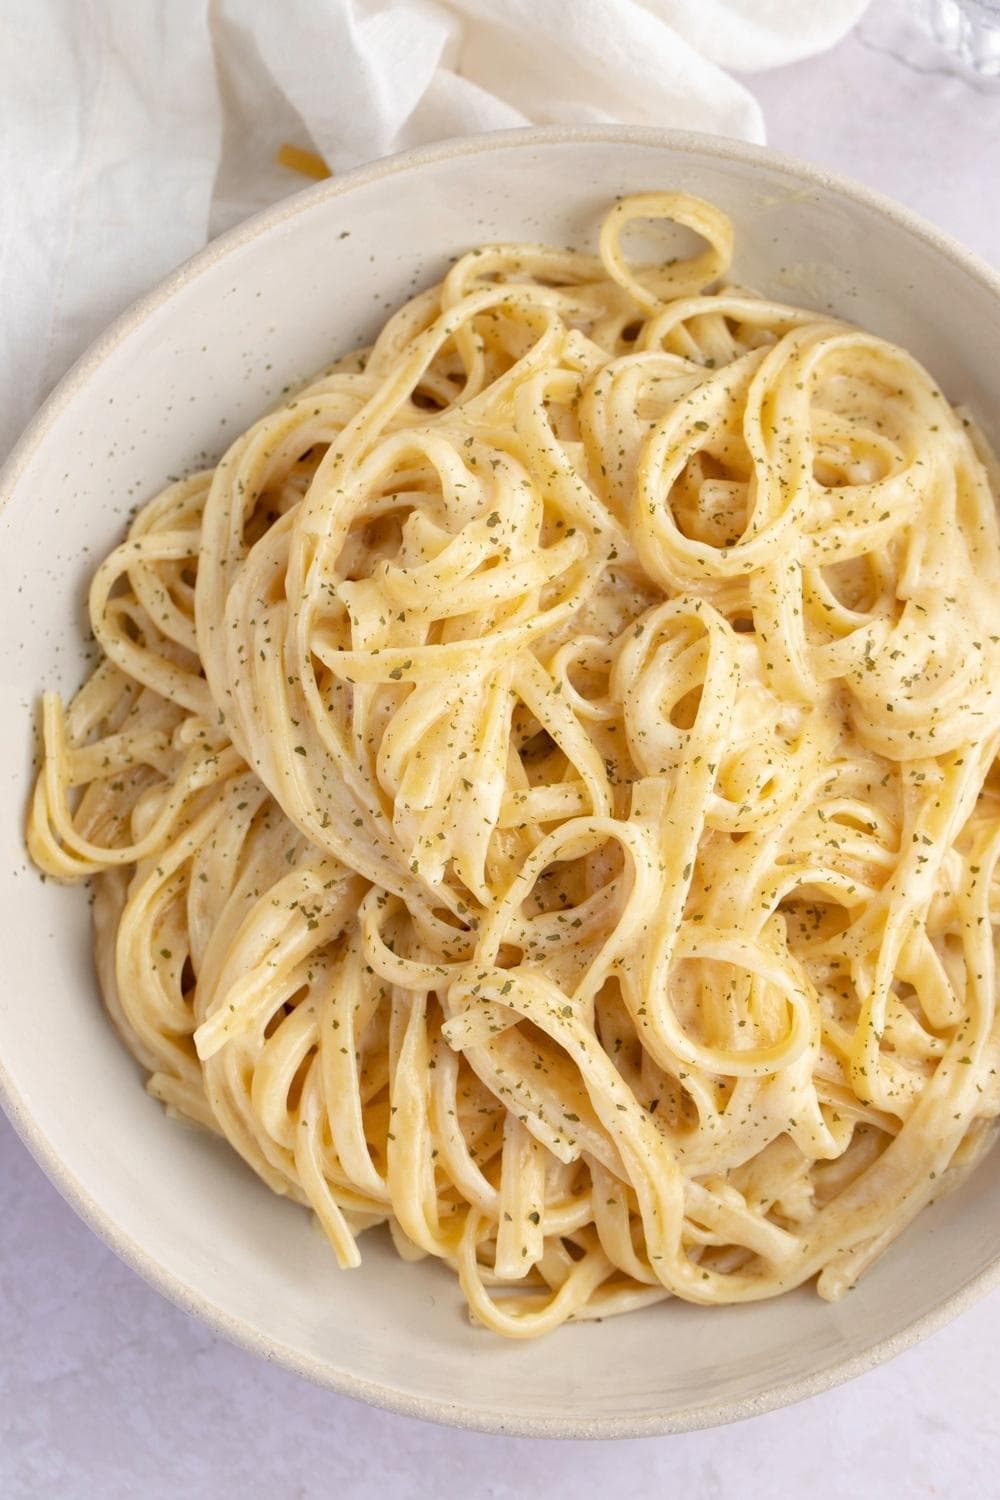 Pasta with creamy sauce sprinkled with dried herbs served on a white plate.